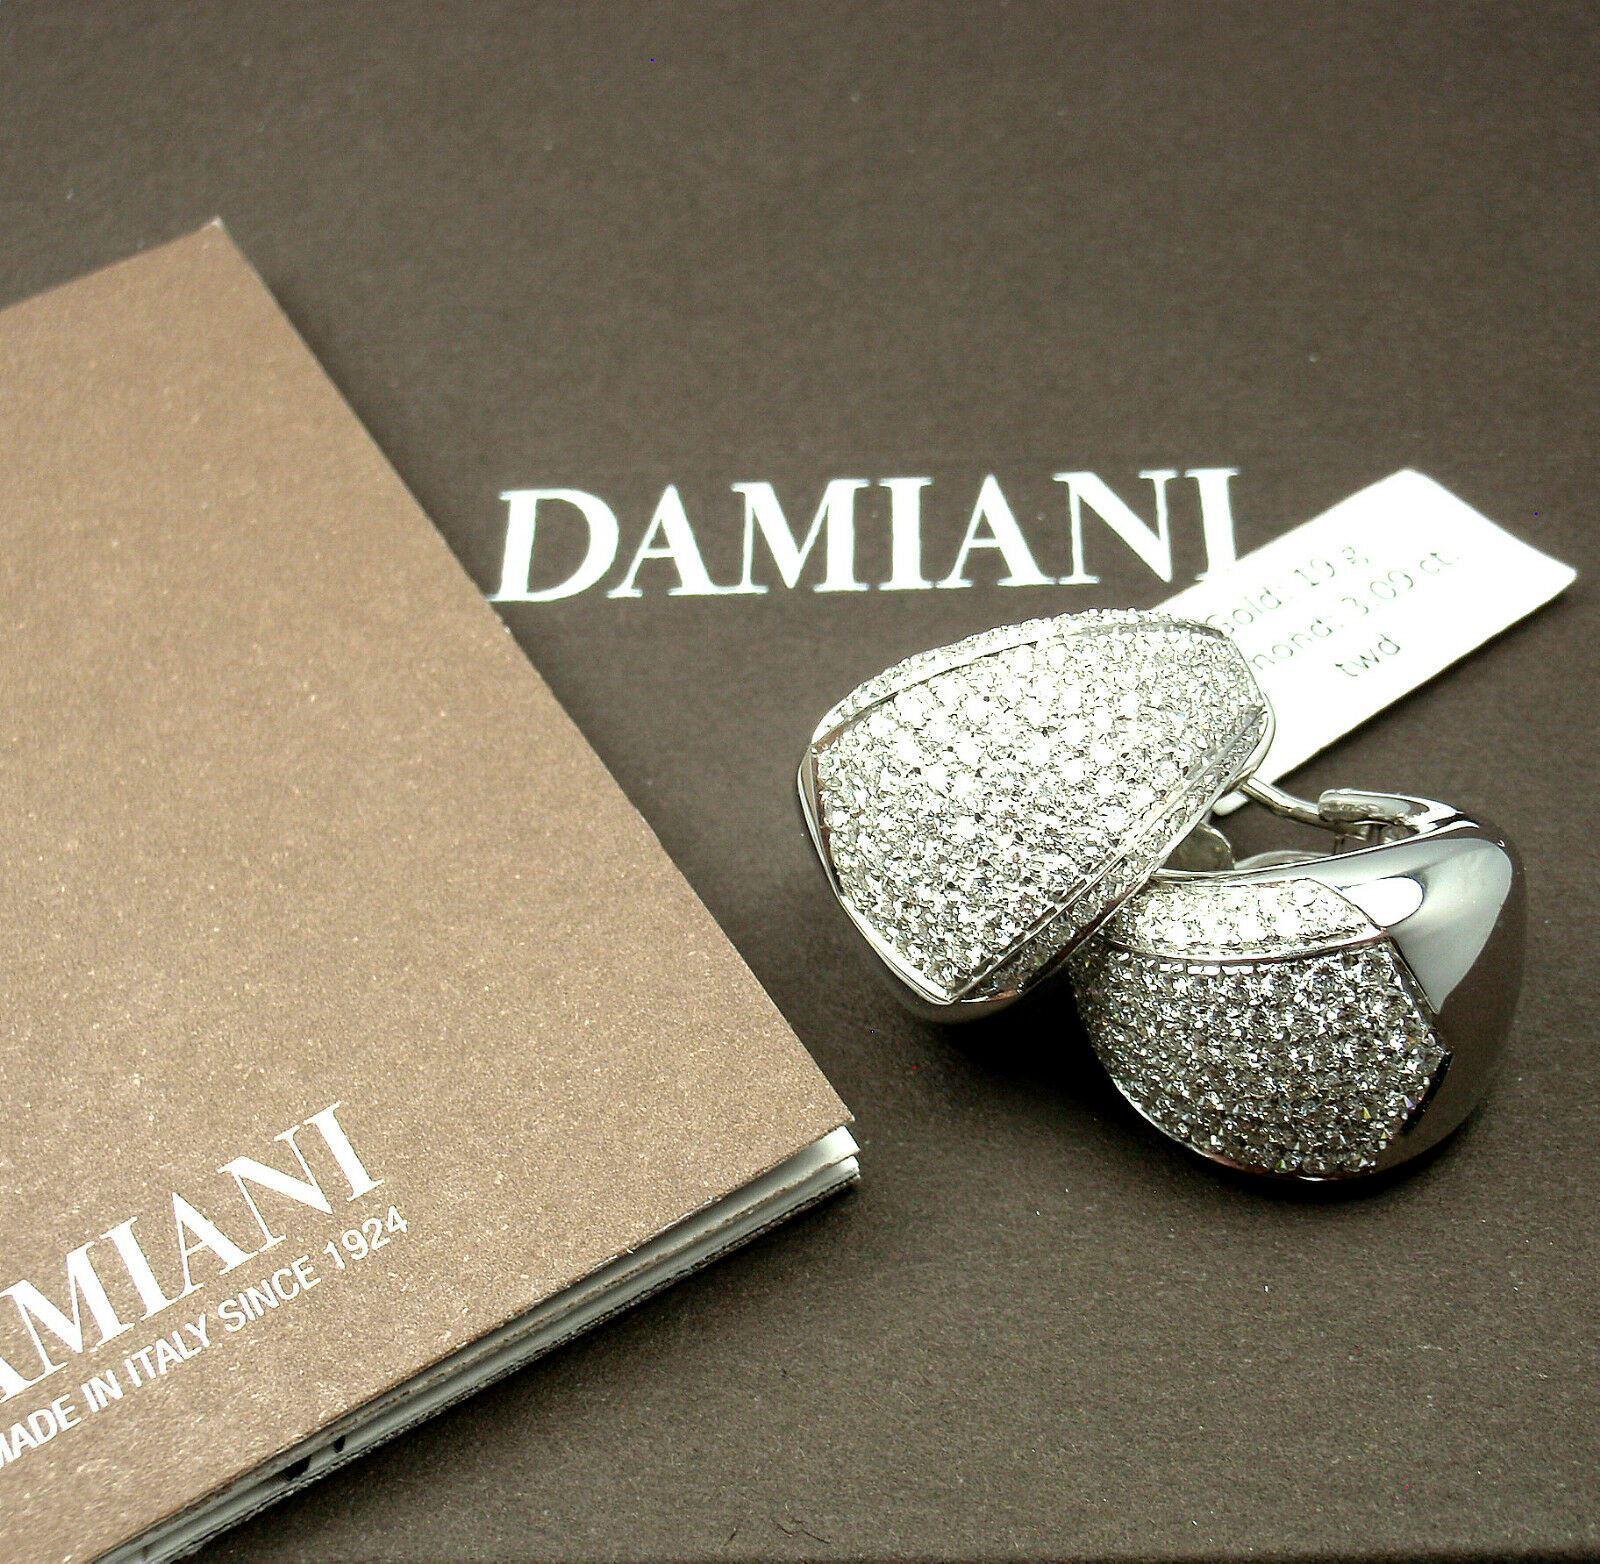 Damiani Da Definire Diamond White Gold Hoop Earrings In Excellent Condition For Sale In Holland, PA